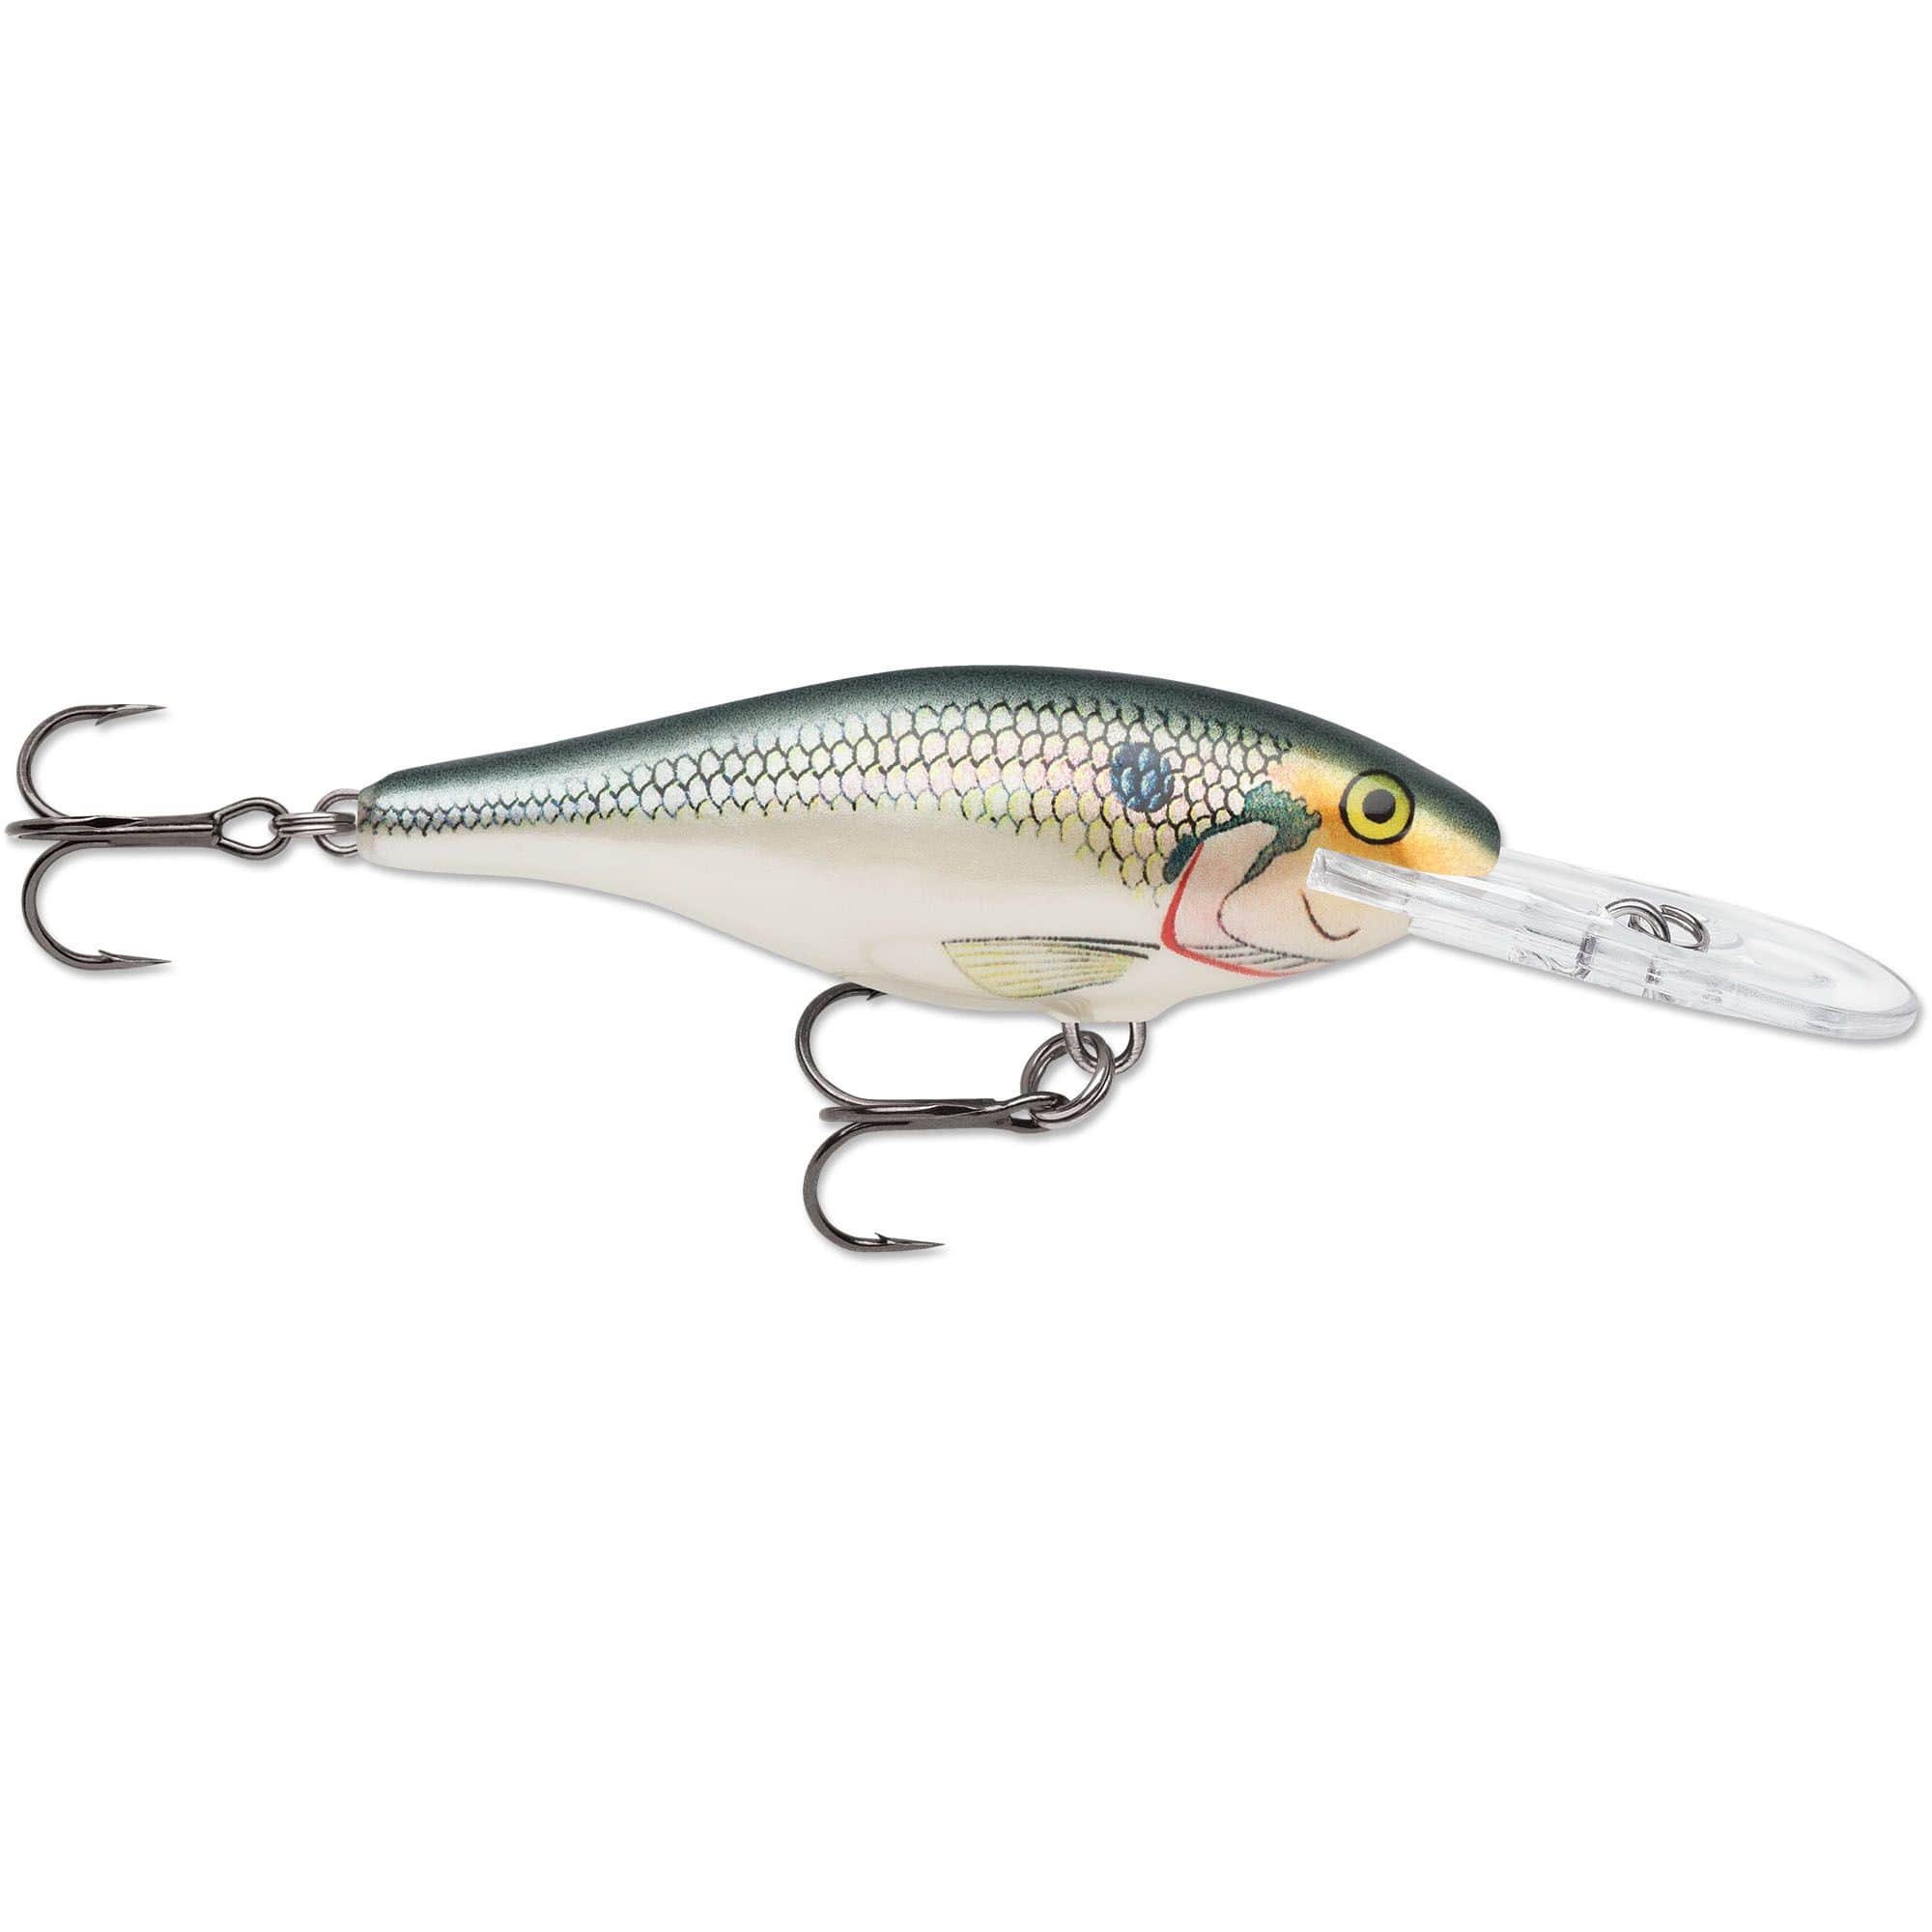 https://media-www.canadiantire.ca/product/playing/fishing/fishing-lures/0780901/rapala-shad-rap-shad-07-c70751c8-bf18-472f-a1a0-2f8e8dbb1e17-jpgrendition.jpg